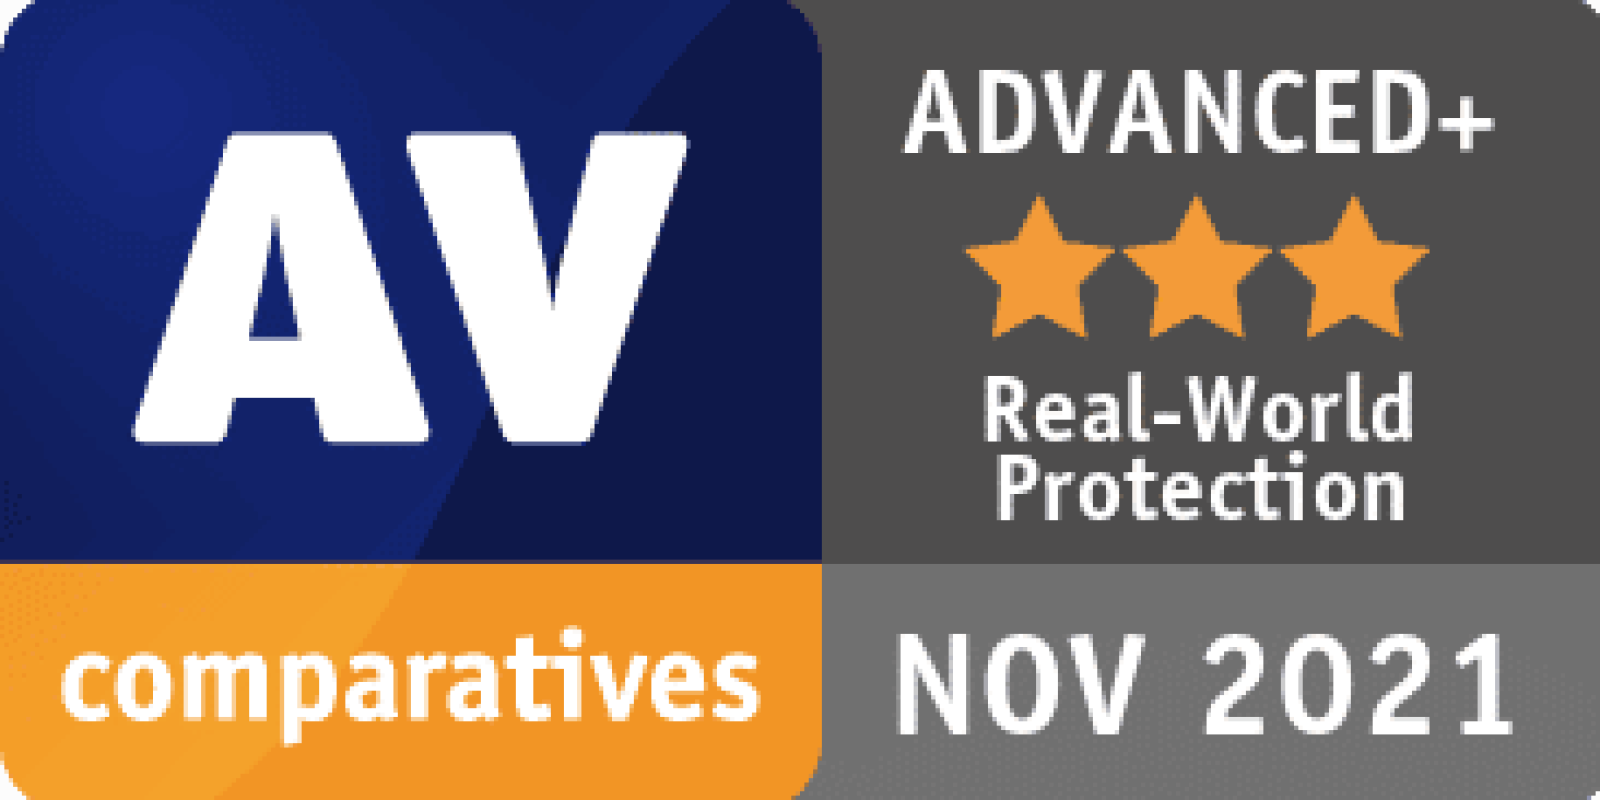 Bitdefender Has Been Awarded by AV Comparatives for Many Years in Row